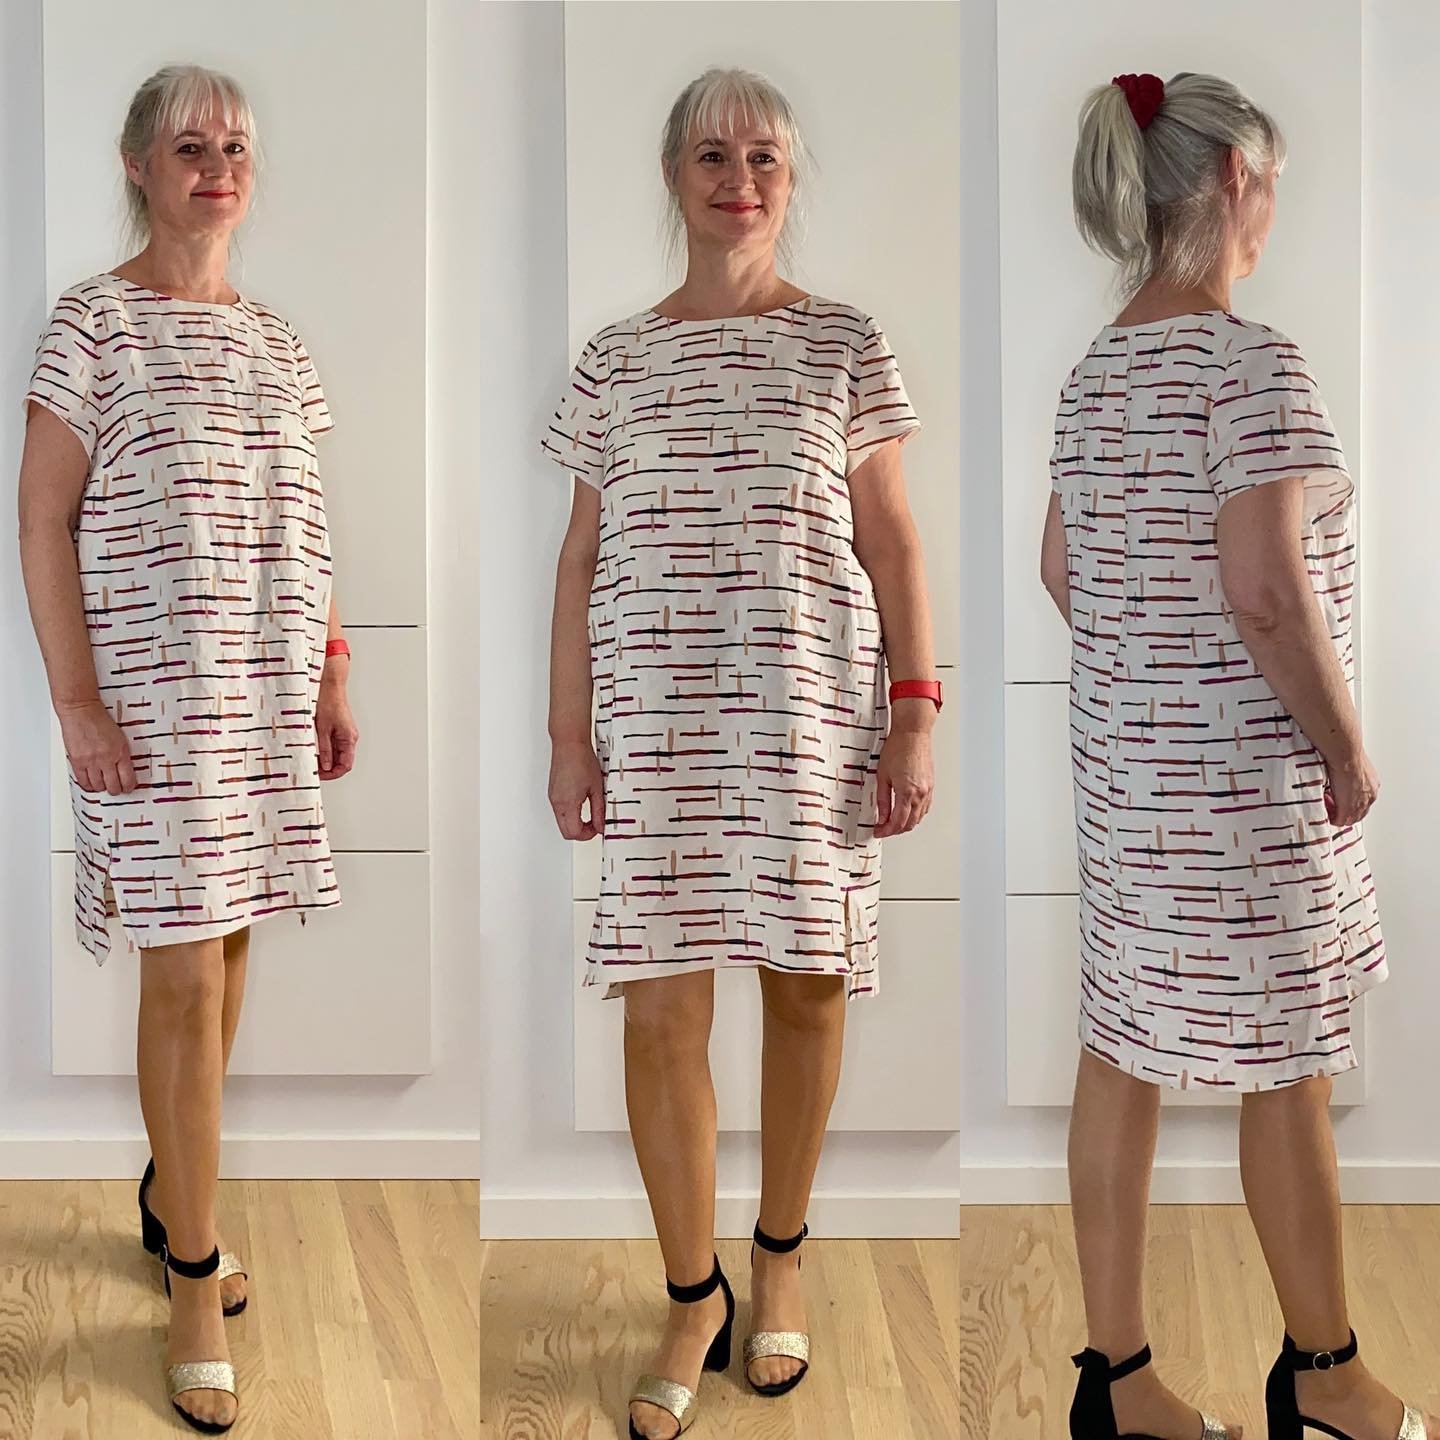 ☀️🧵 SUMMER ESSENTIALS 👗🪡 

SO HAPPY ABOUT MY NAMED CLOTHING INARI DRESS HACK IN WOVEN FABRIC 😀👗🧵✂️🪡&hearts;️

@fabricandclothcopenhagen #fabricandclothcopenhagen #namedclothing #namedclothingpatterns #inaridress #atelierbrunettefabric #atelier